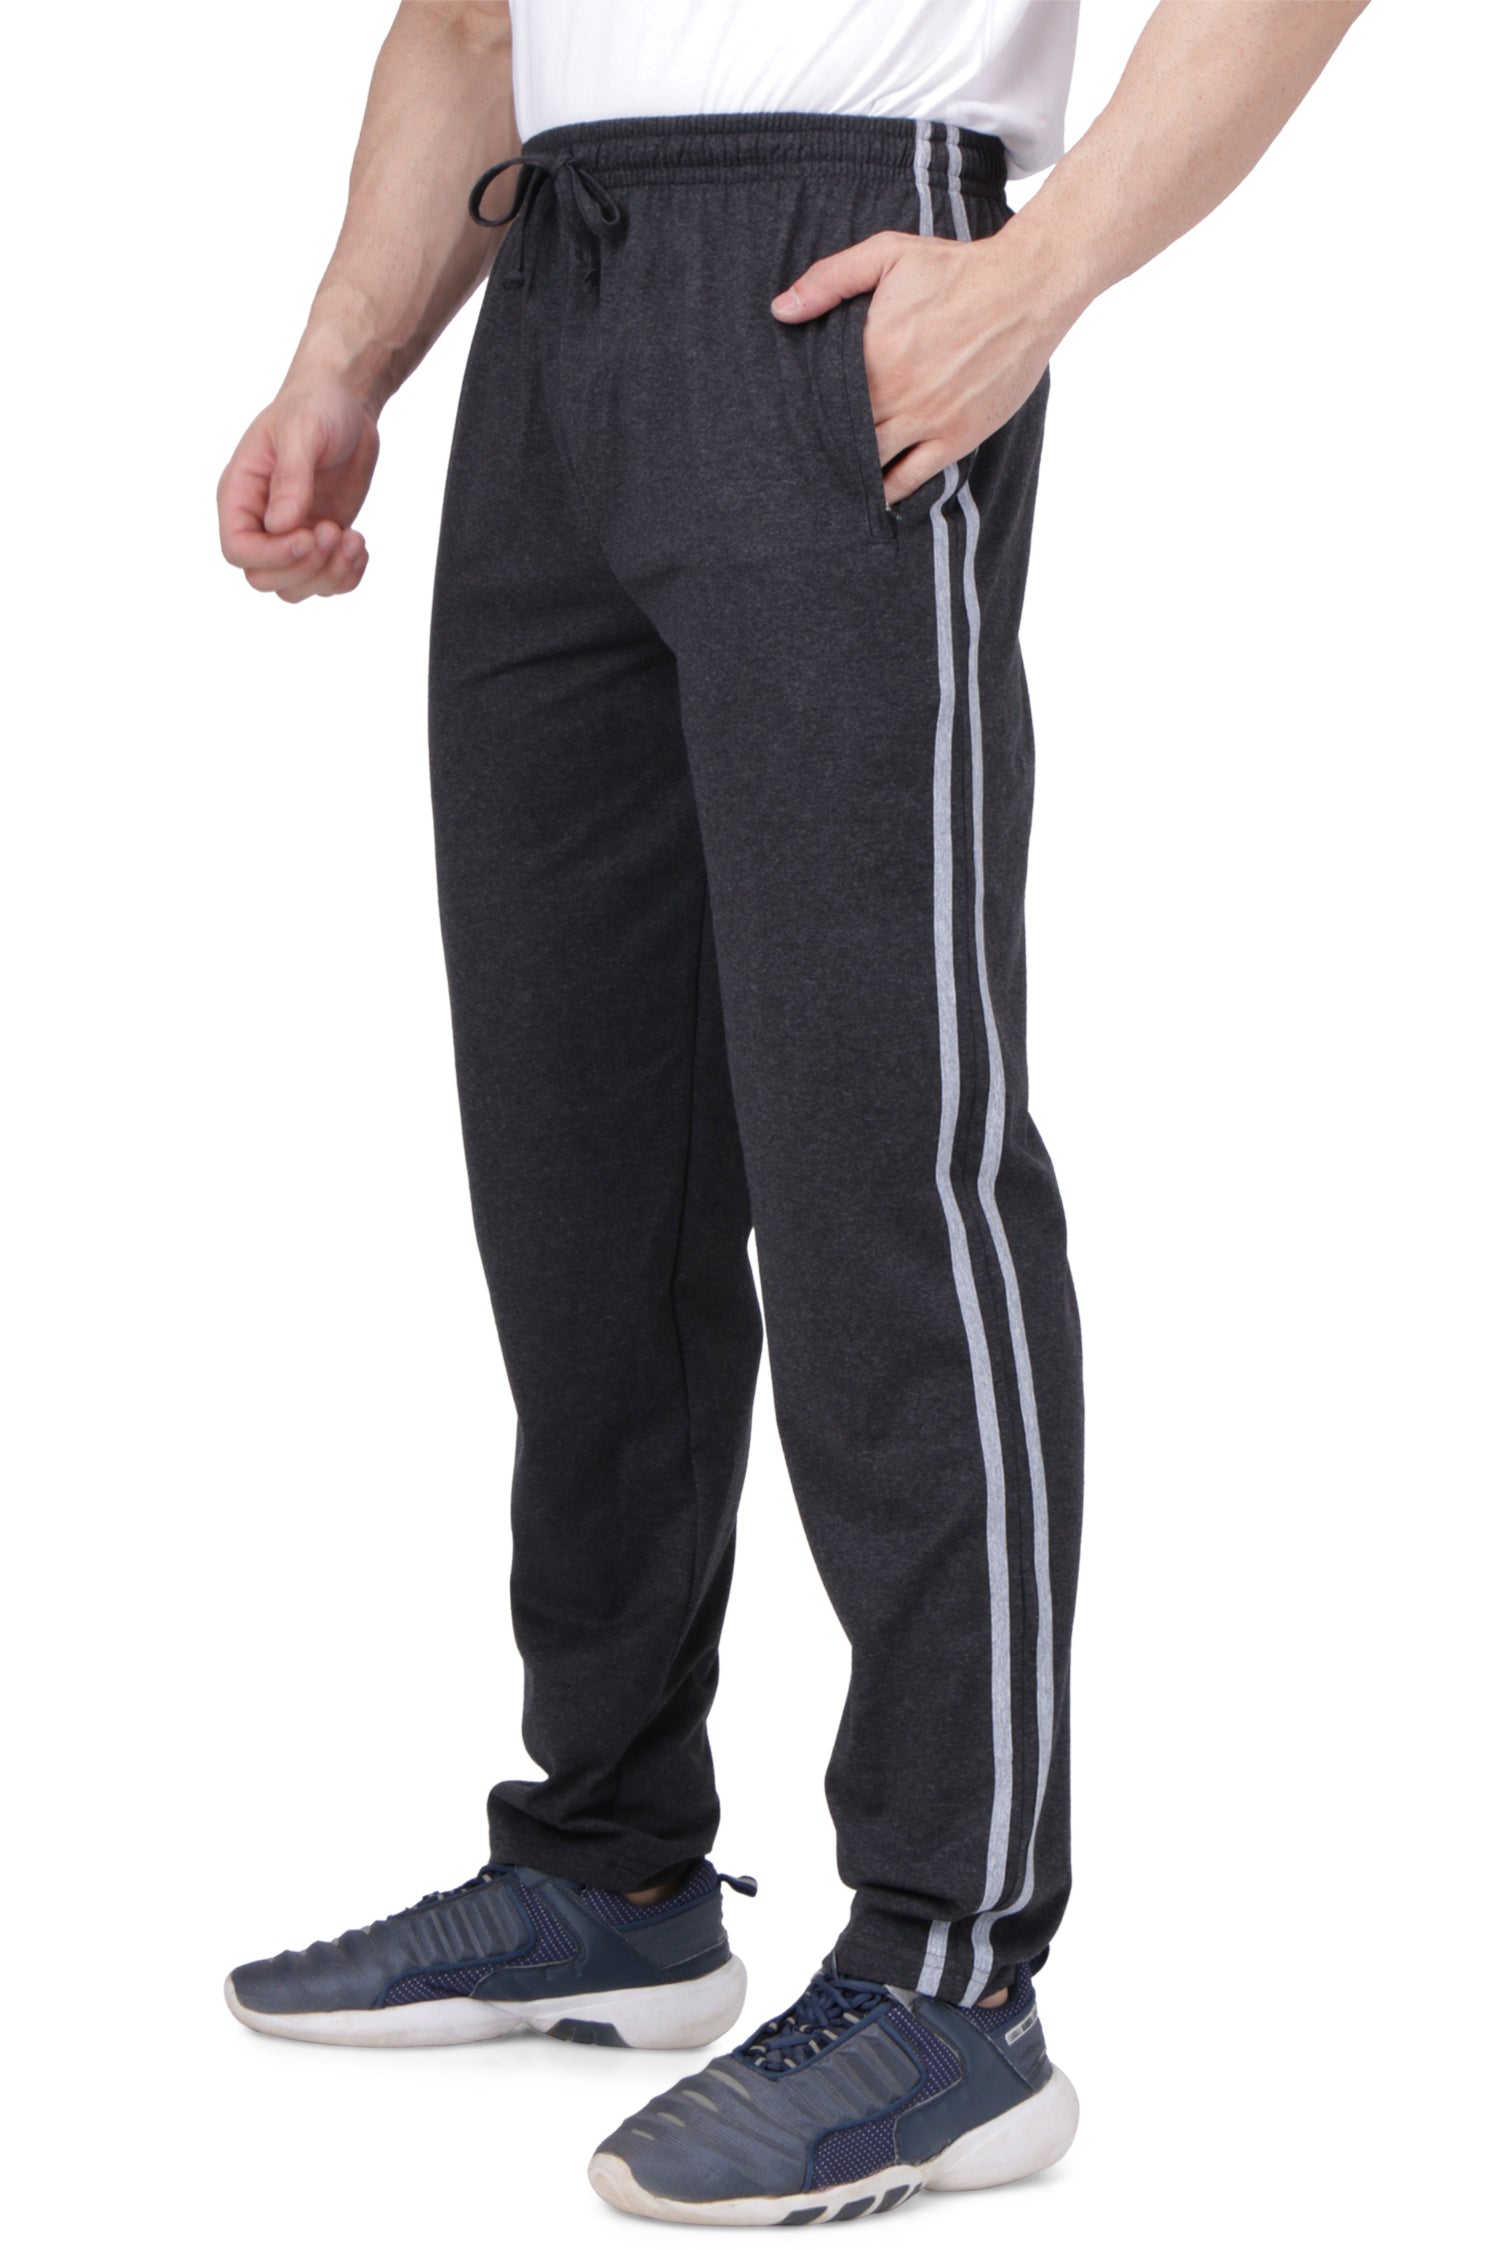 Fflirtygo Combo of Men's Cotton Track Pants, Joggers for Men, Men�s Leisure  Wear, Night Wear Pajama, Black and Blue Color with Latest Trend and  Pockets�for Sports Gym Athletic Training Workout : Amazon.in: